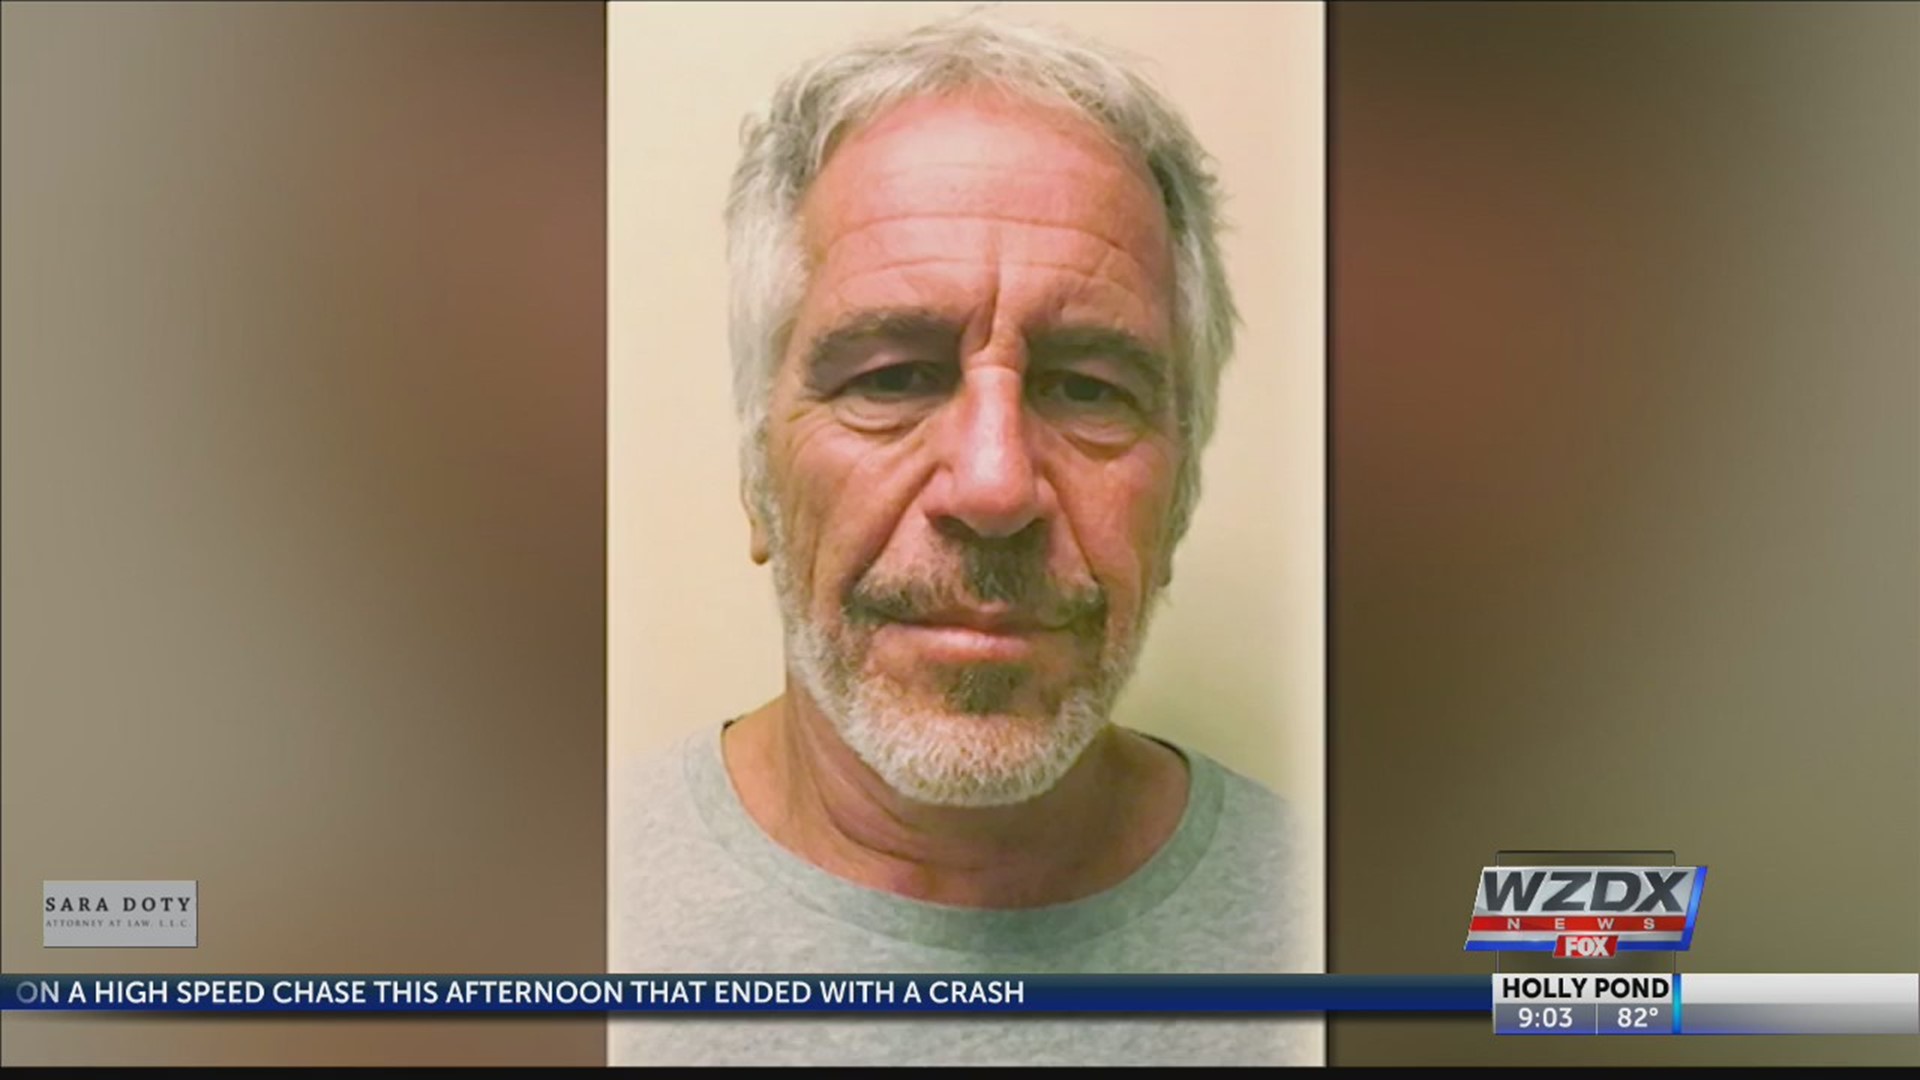 Jeffrey Epstein, the well-connected financier accused of orchestrating a sex-trafficking ring, had been taken off suicide watch before he killed himself in a New York jail, a person familiar with the matter said Saturday.